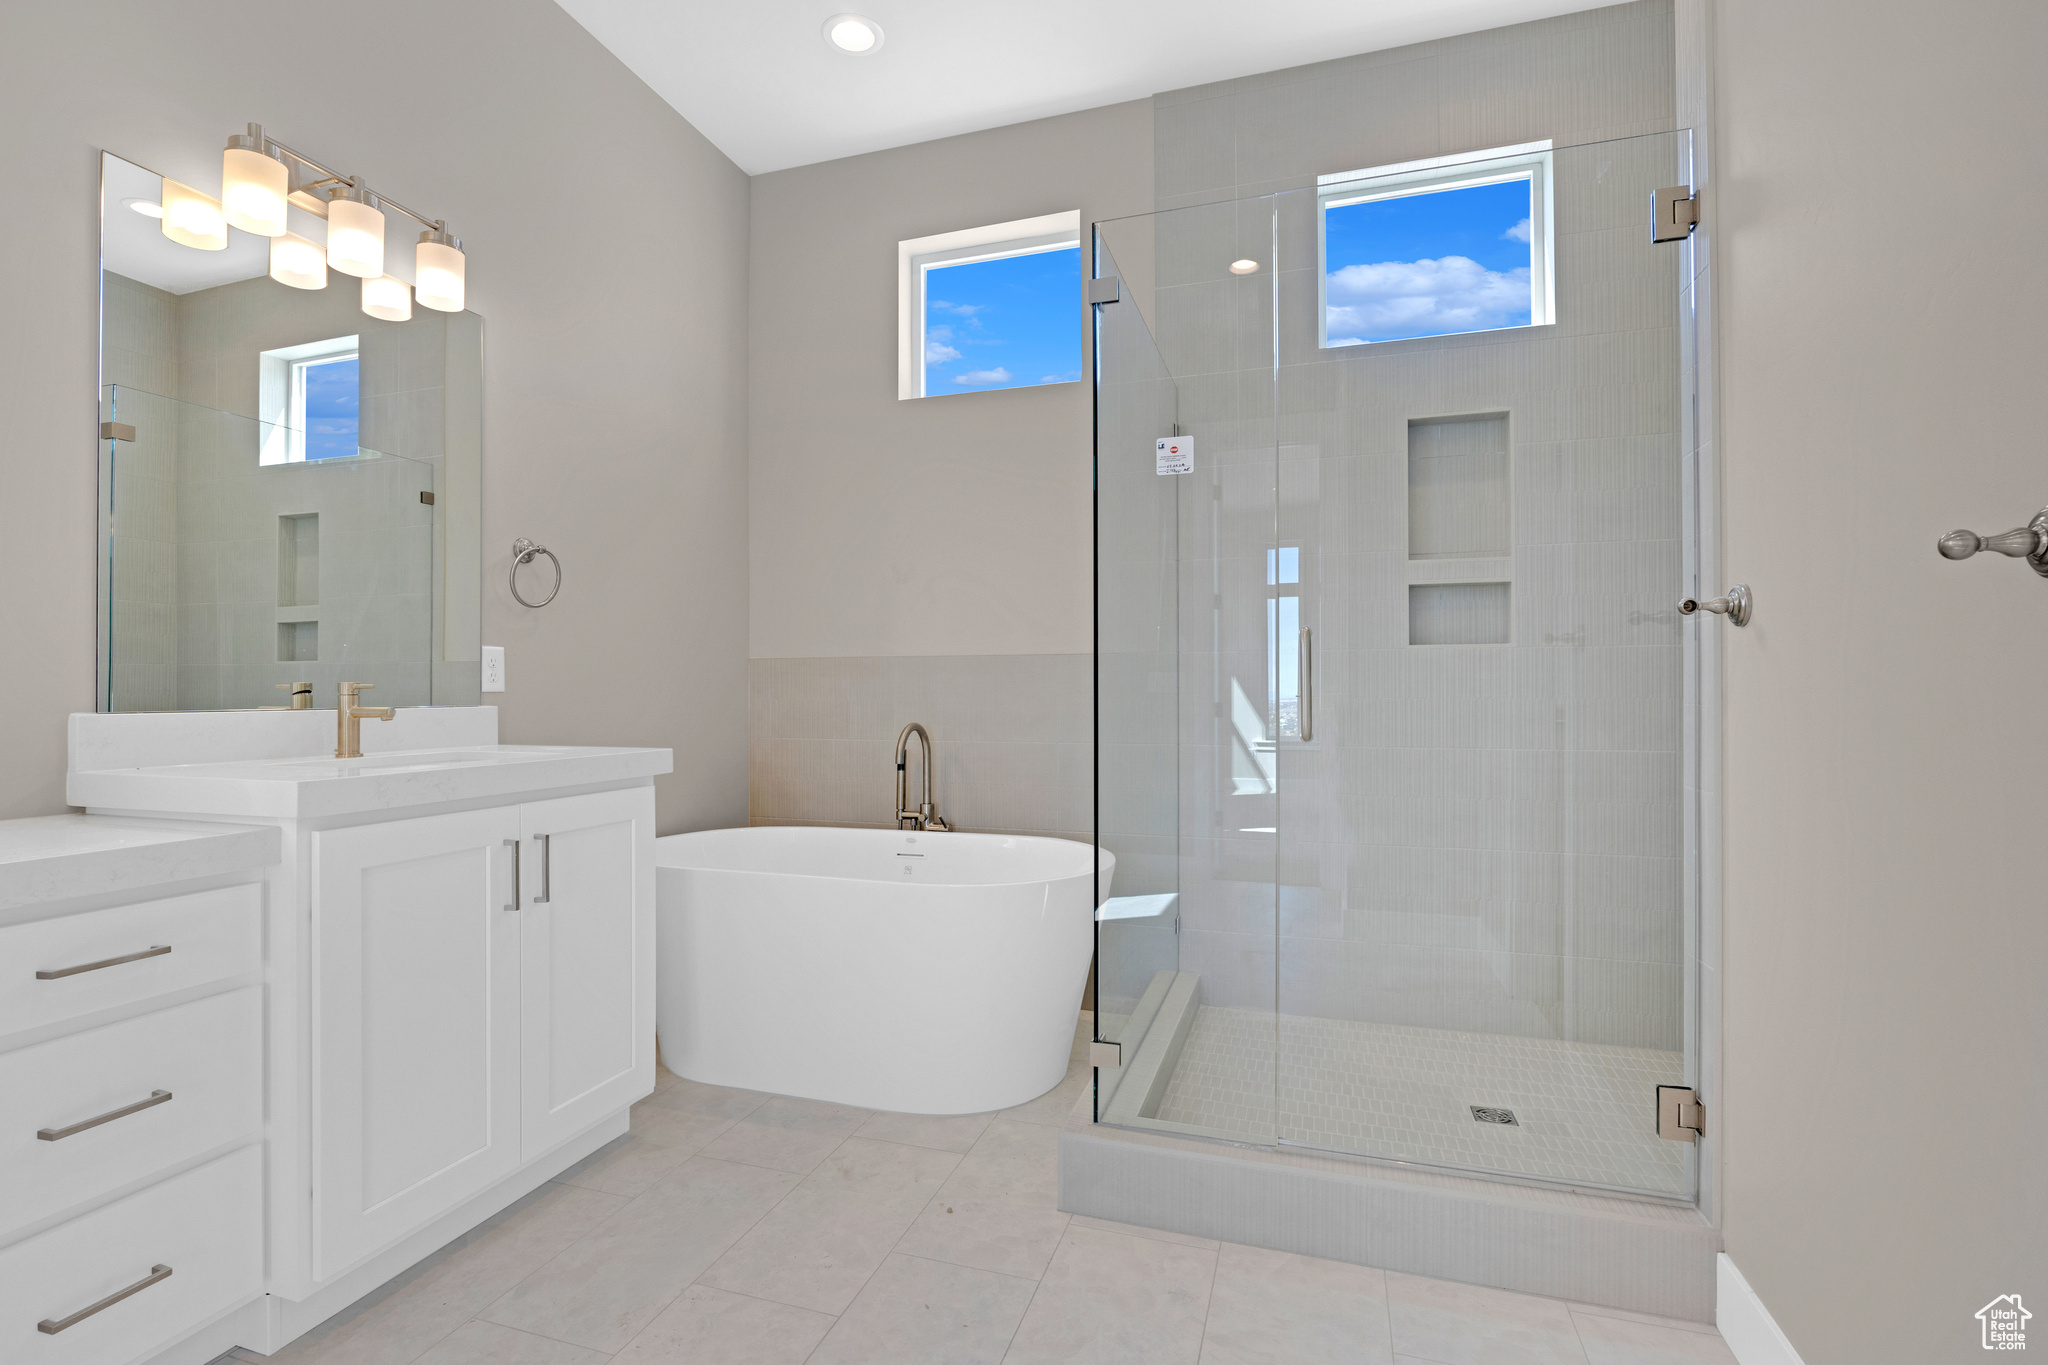 Bathroom with a healthy amount of sunlight, an enclosed shower, tile floors, and vanity